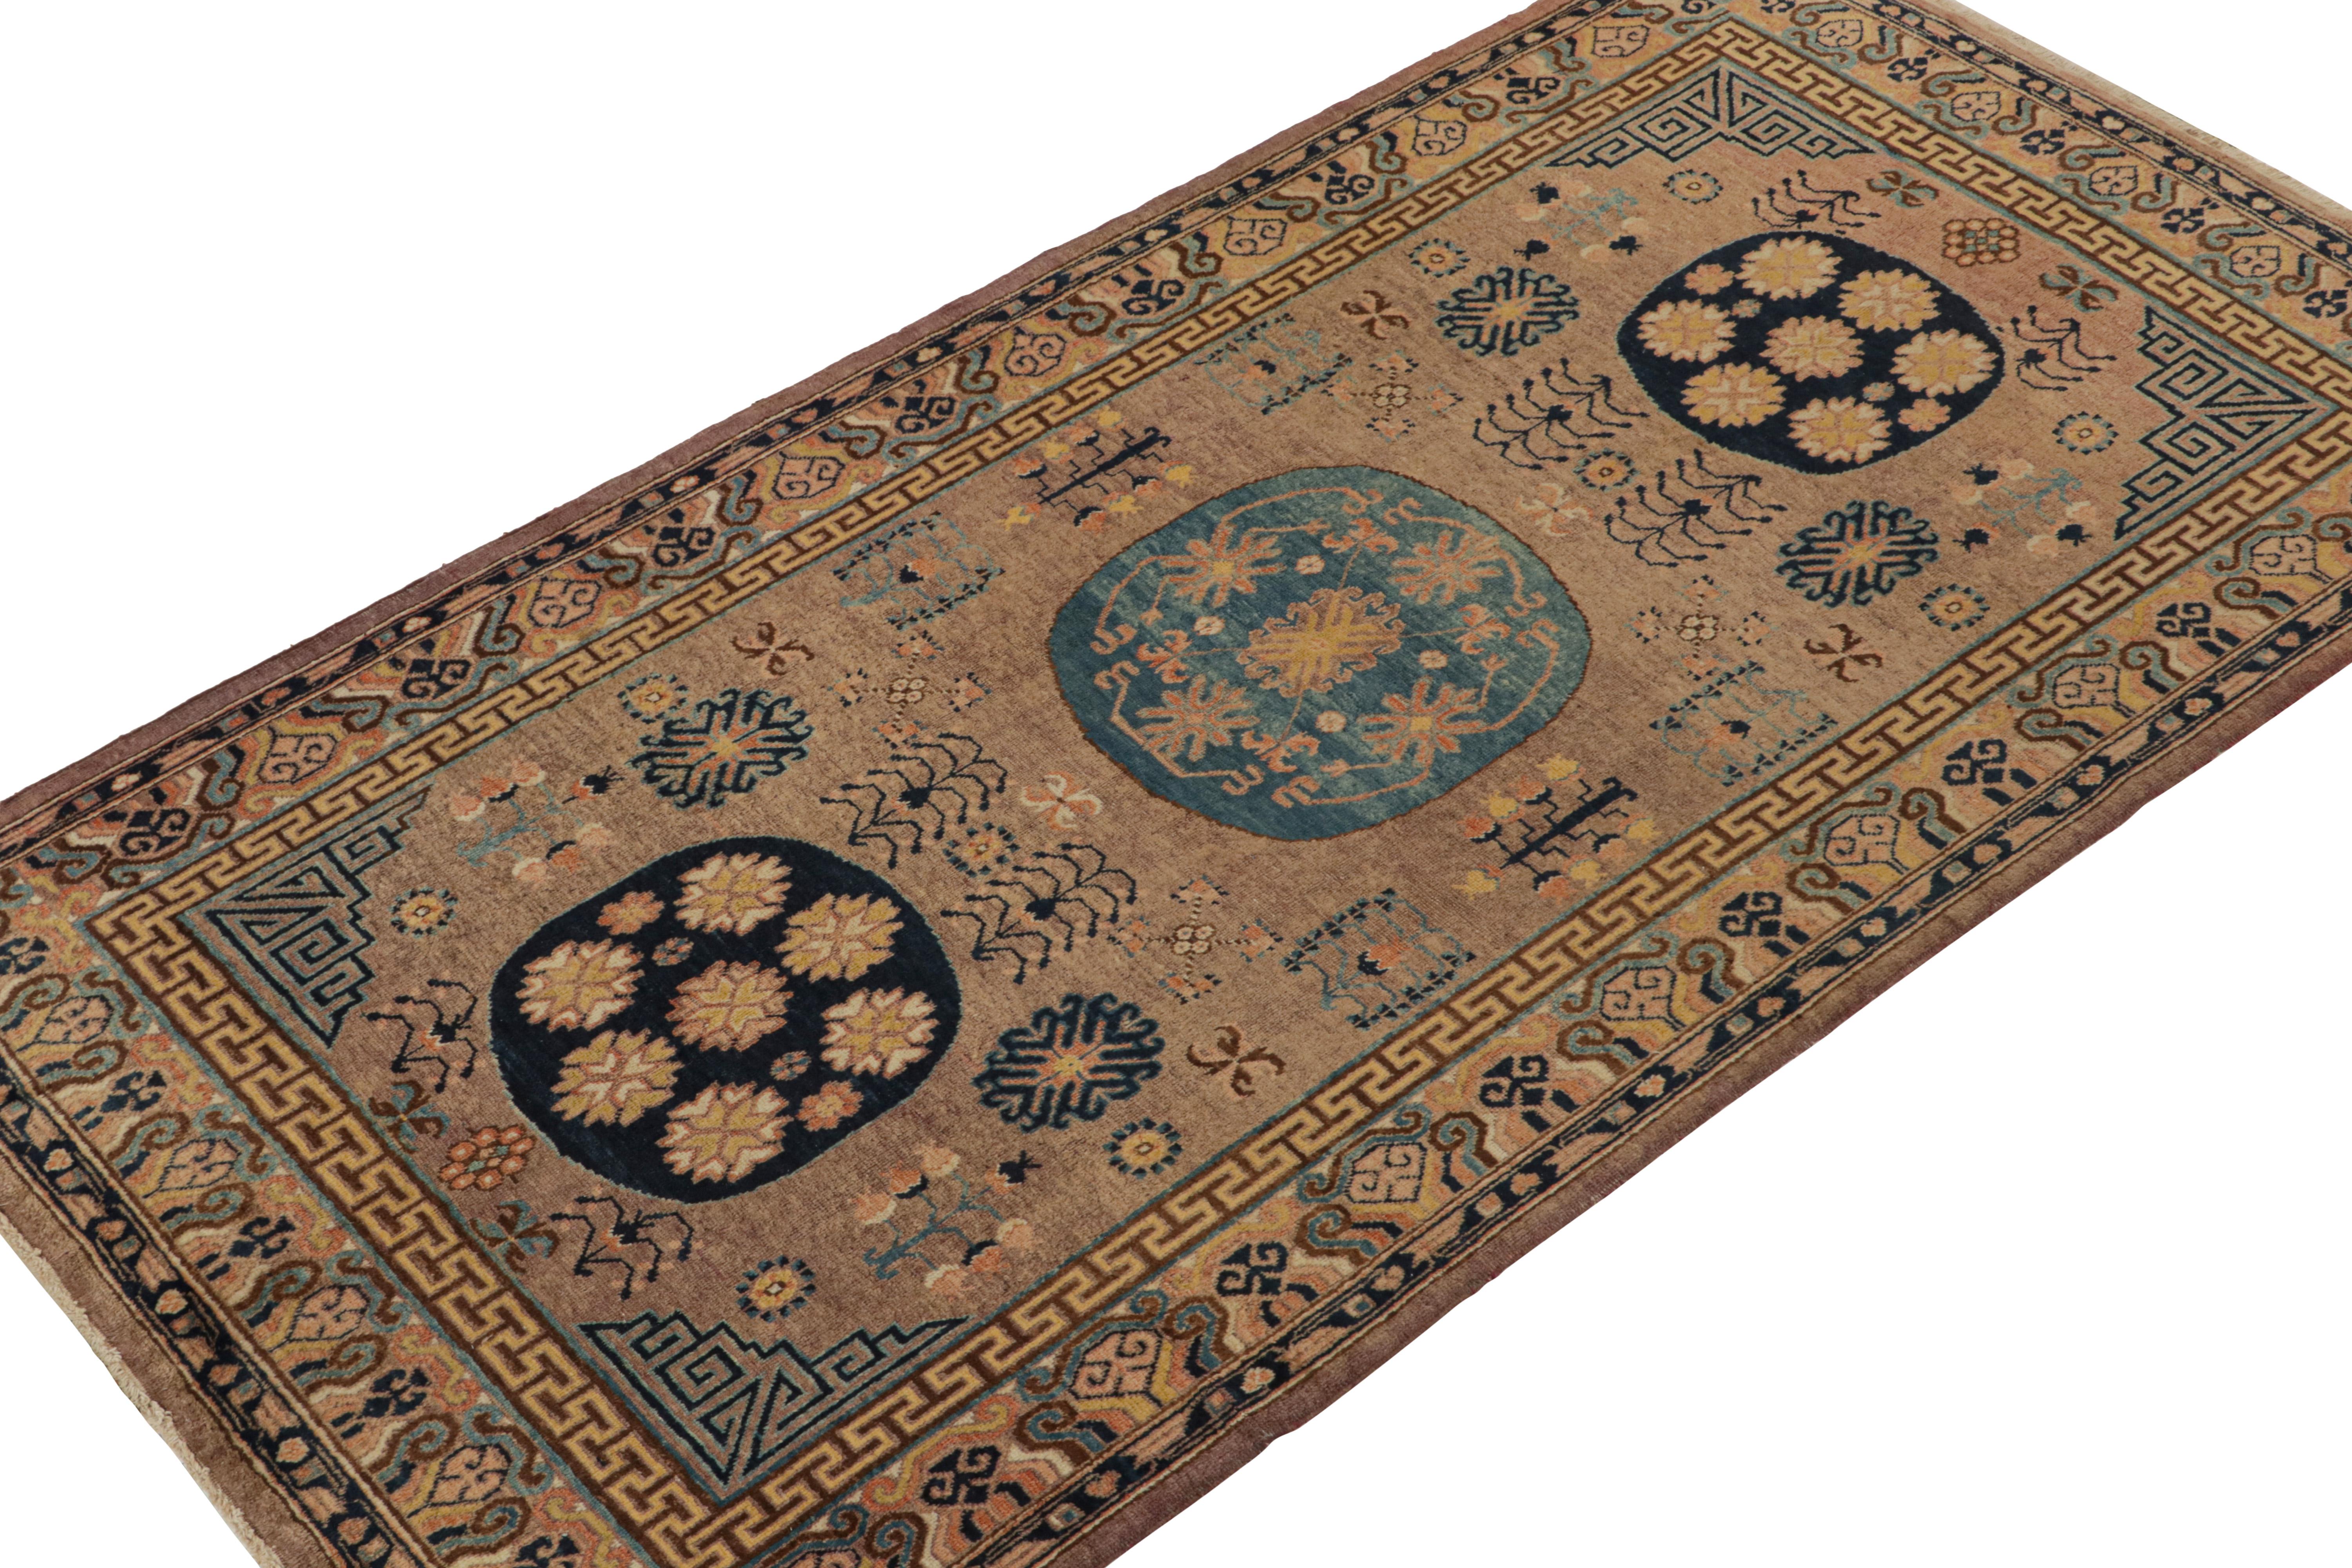 Hand-knotted in wool and hailing from East Turkestan circa 1900-1910, this 5x9 Antique Khotan rug is a rare new curation from Rug & Kilim.

On the Design: 

The piece enjoys traditional medallions and floral motifs in the Chinese style, with a play